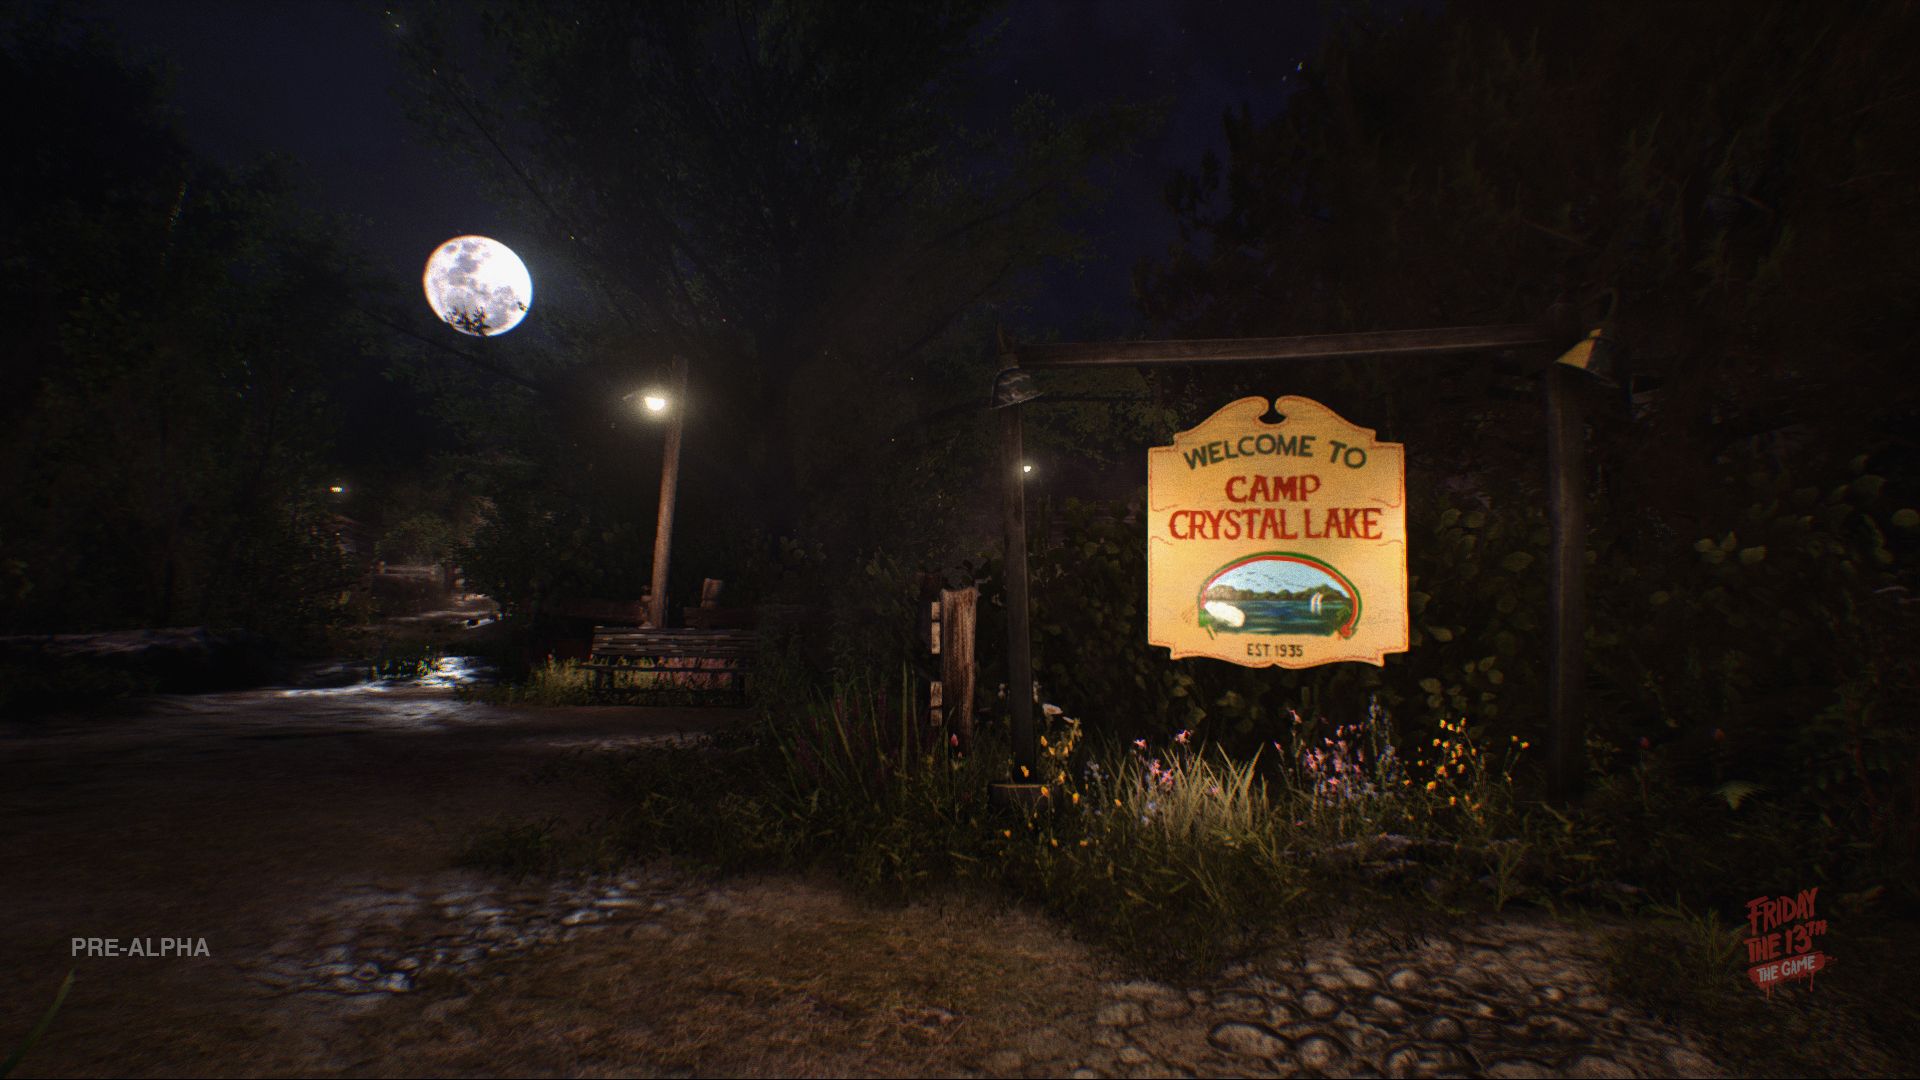 Friday The 13Th The Game Download Thread - Colaboratory